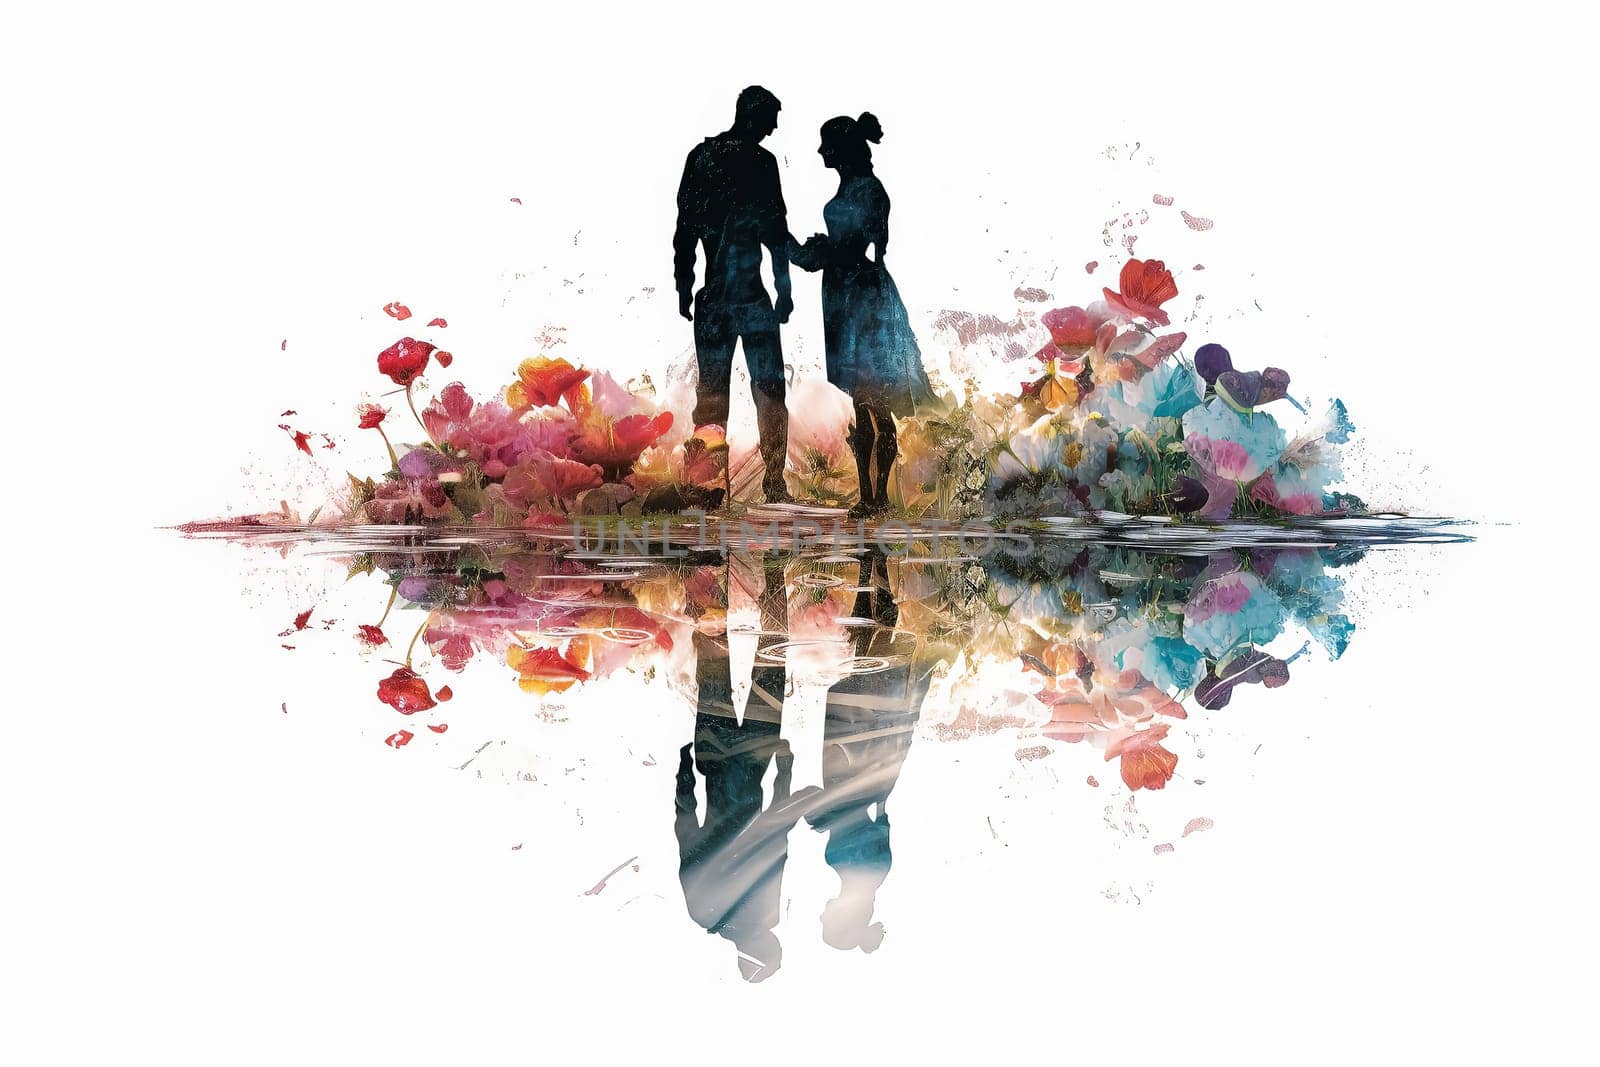 Experience the magic of love as a watercolor illustration depicts a couple strolling outdoors after the rain. A romantic date captured in a picturesque setting.